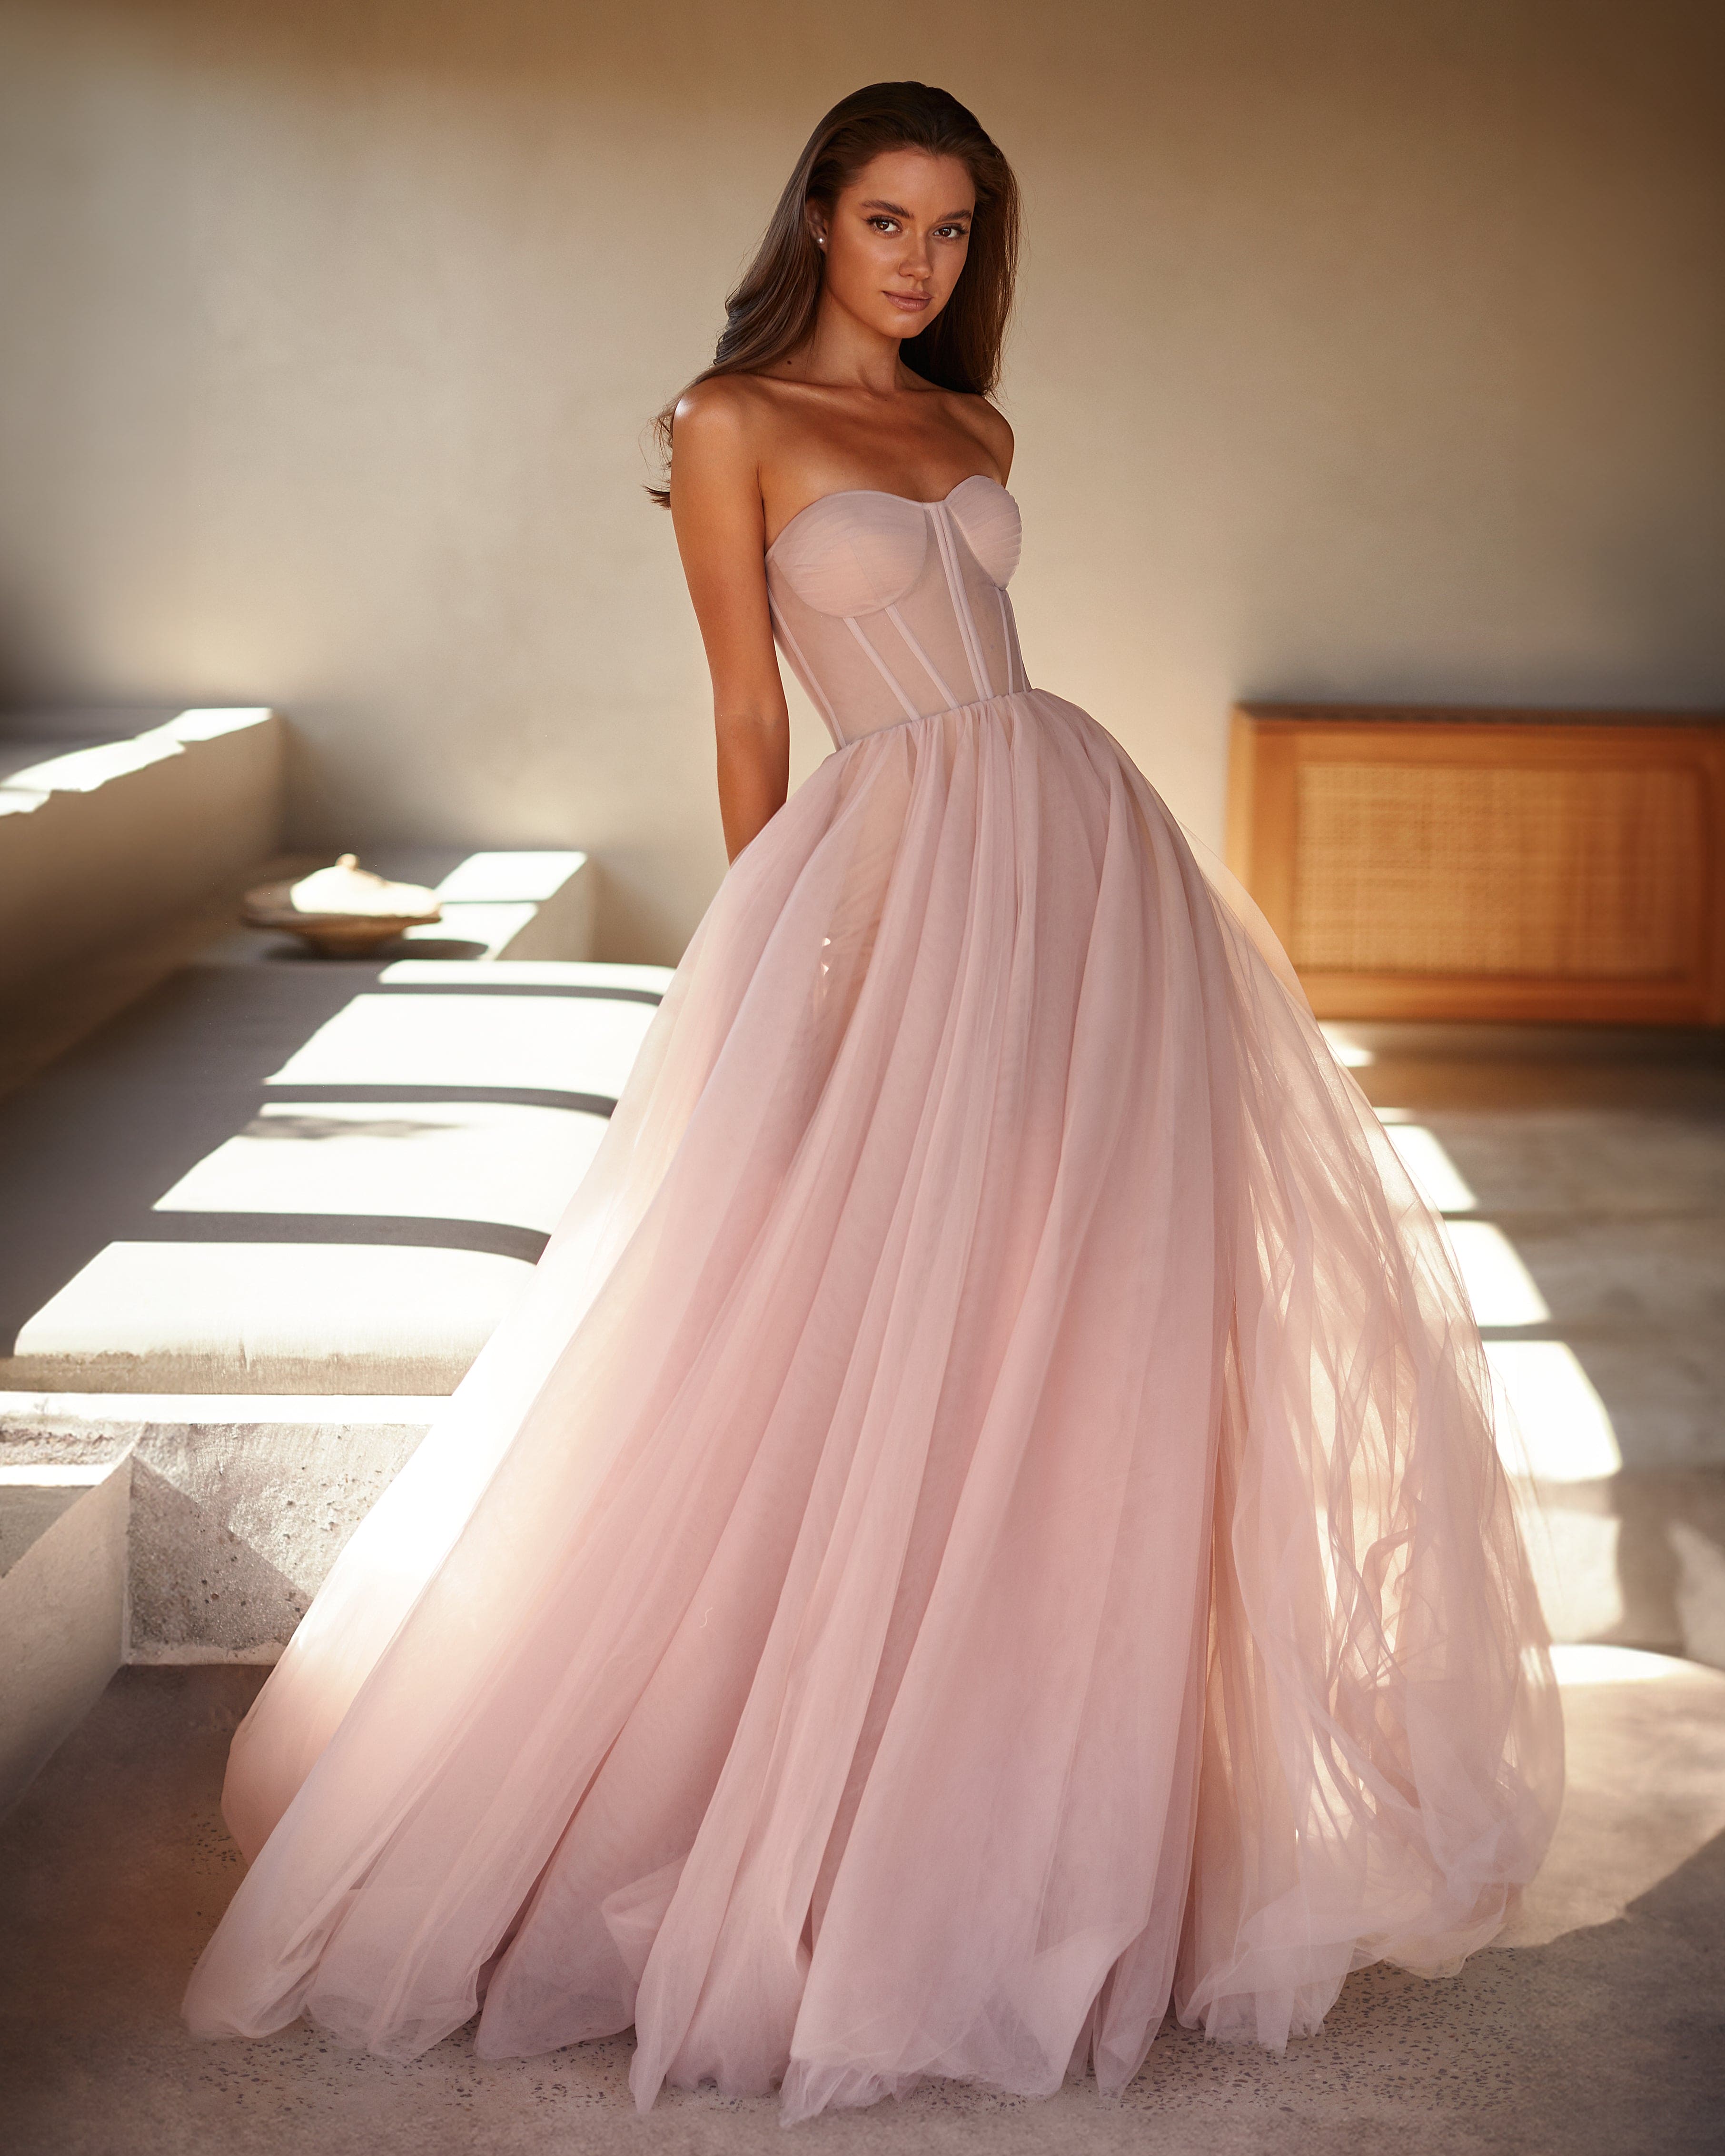 Misty Rose Tulle Maxi Dress with a Corset Bustier ➤➤ Milla